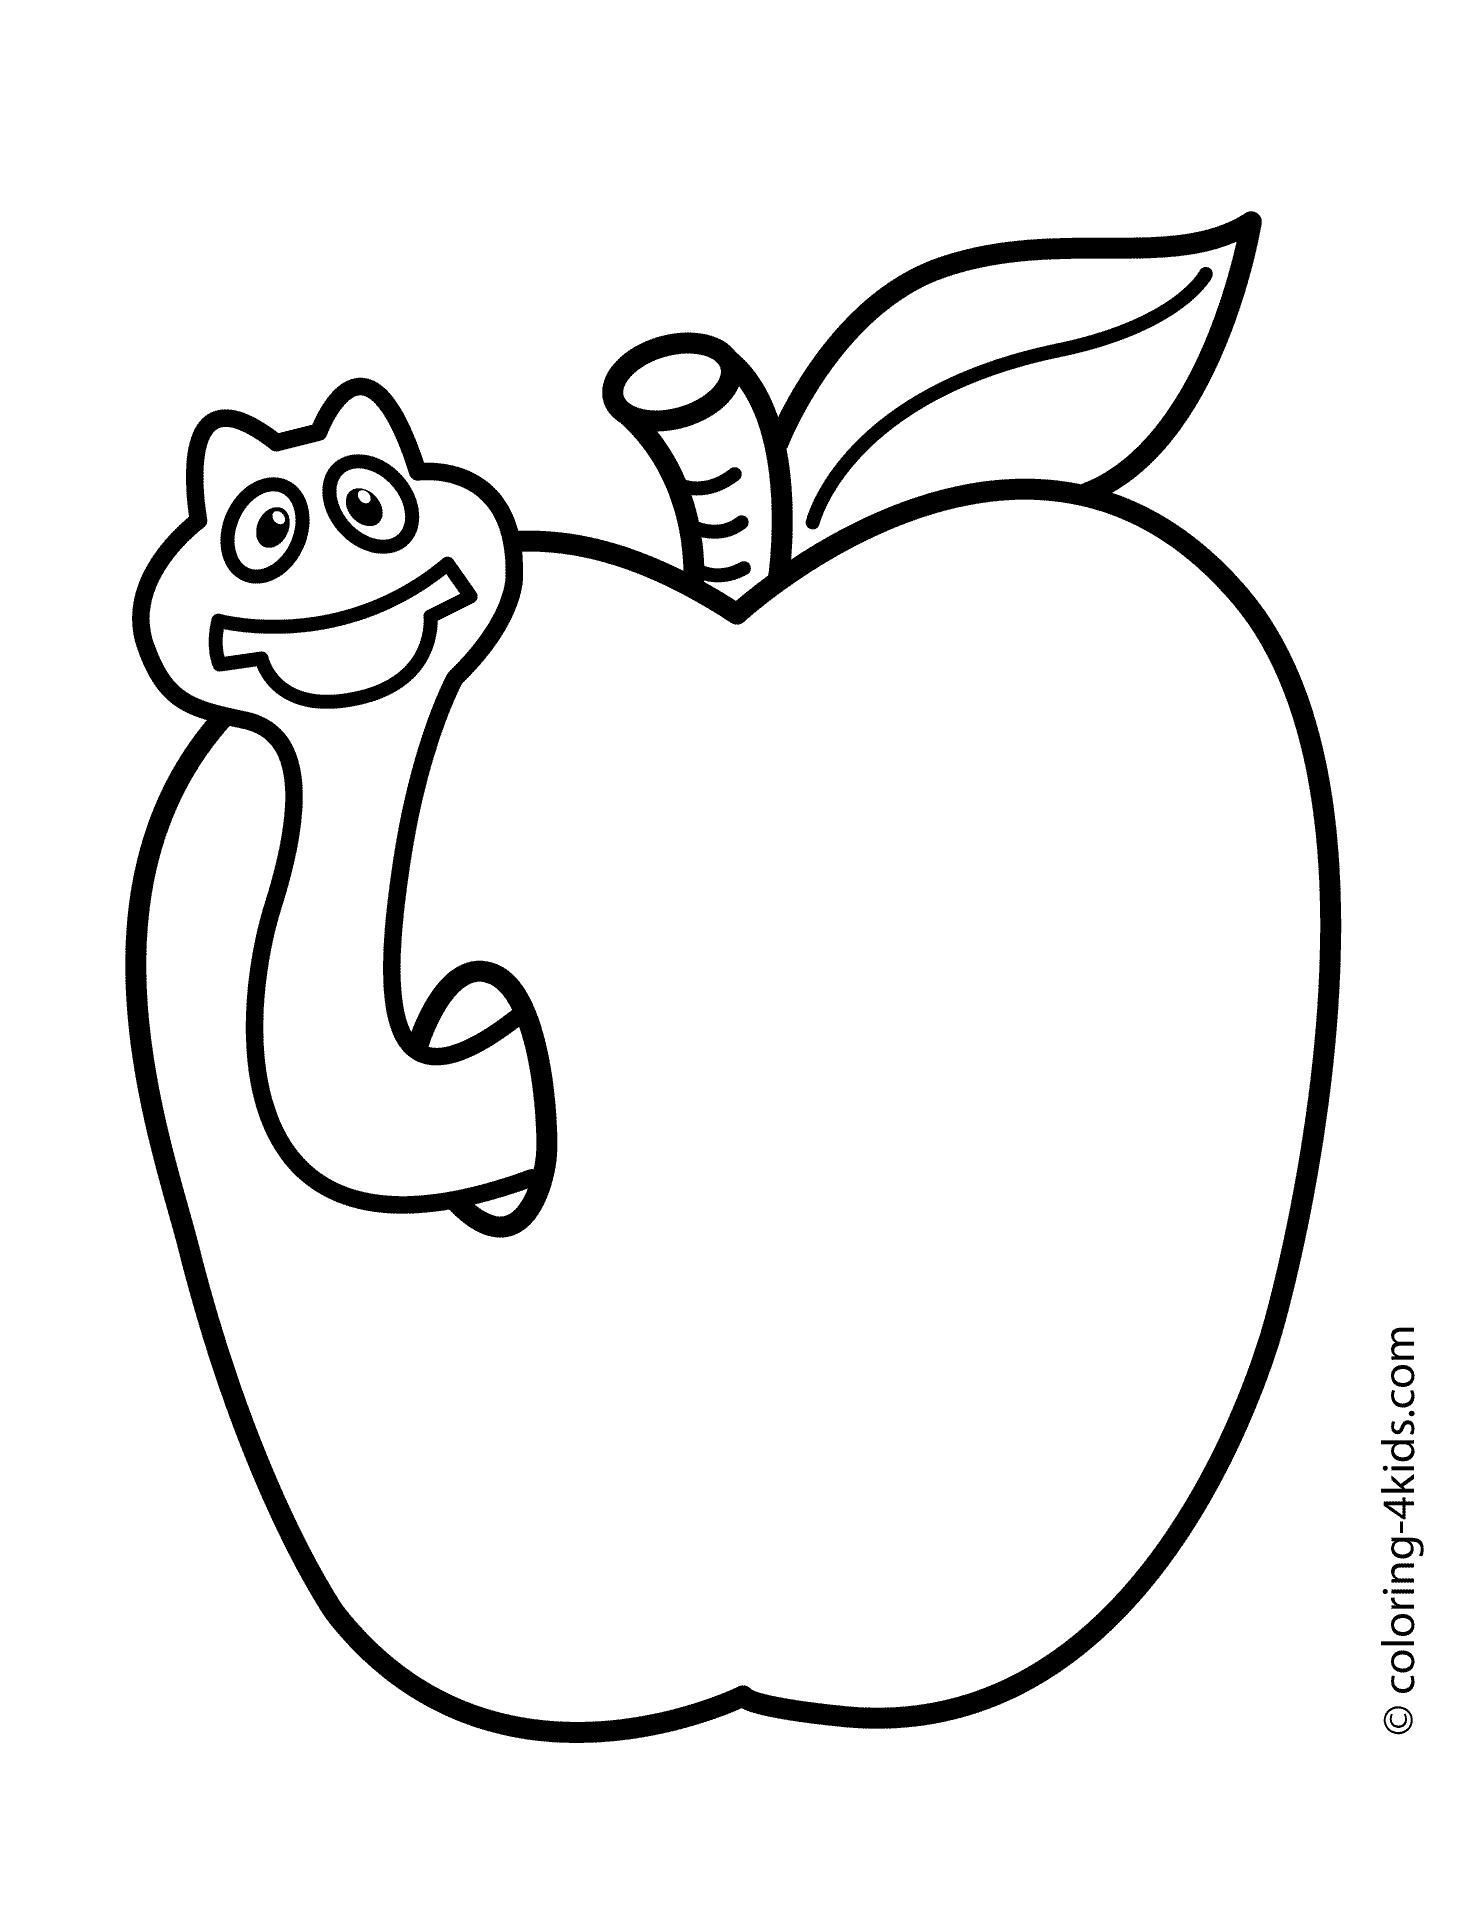 Free Coloring Pages For 2 Year Olds